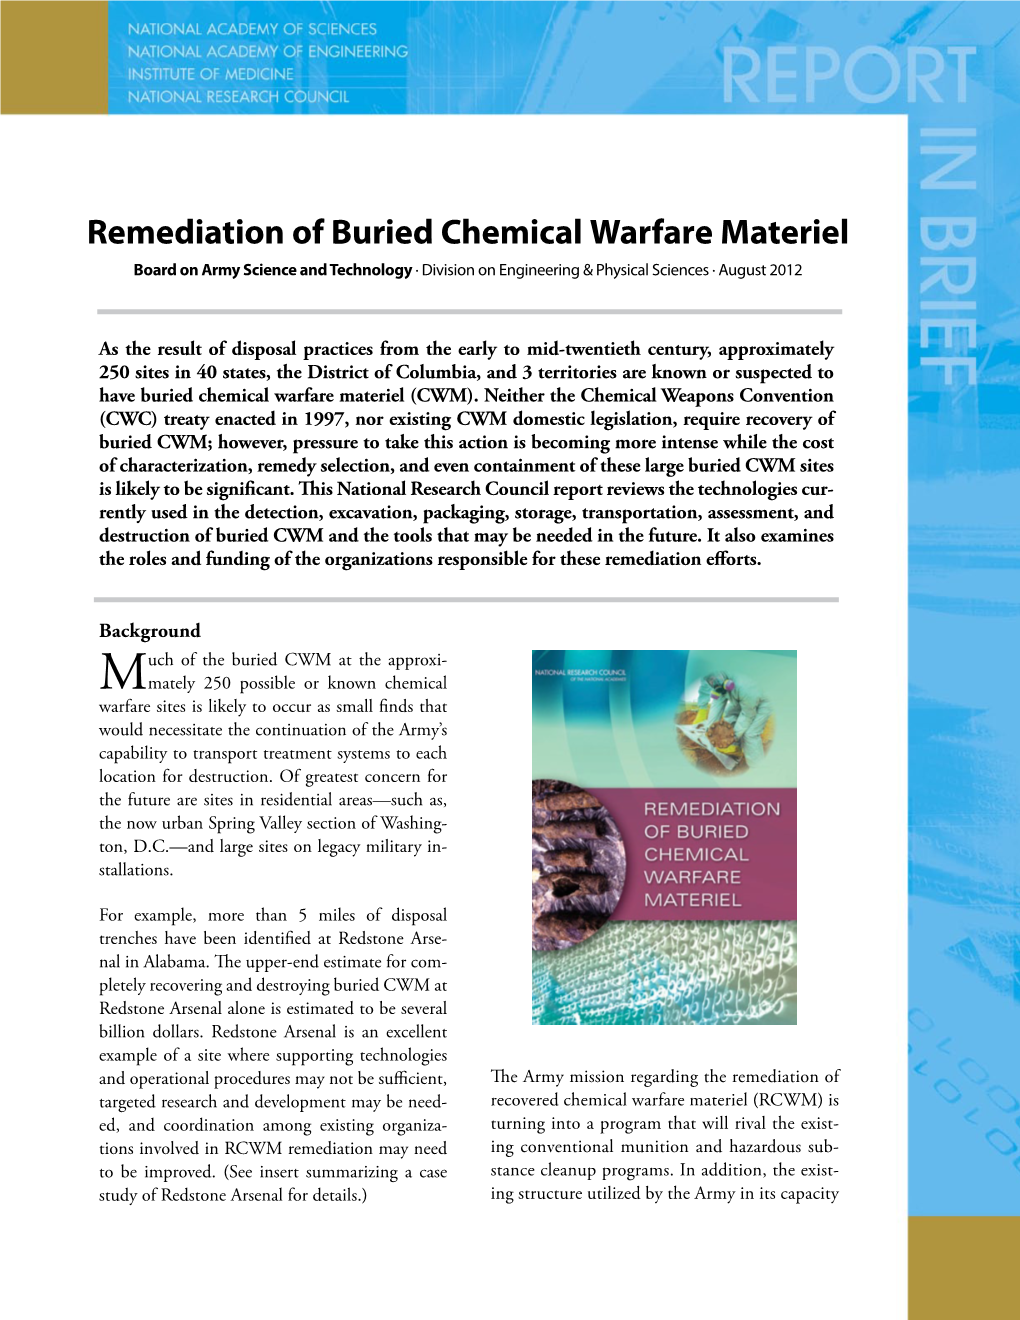 Remediation of Buried Chemical Warfare Materiel Board on Army Science and Technology ∙ Division on Engineering & Physical Sciences ∙ August 2012